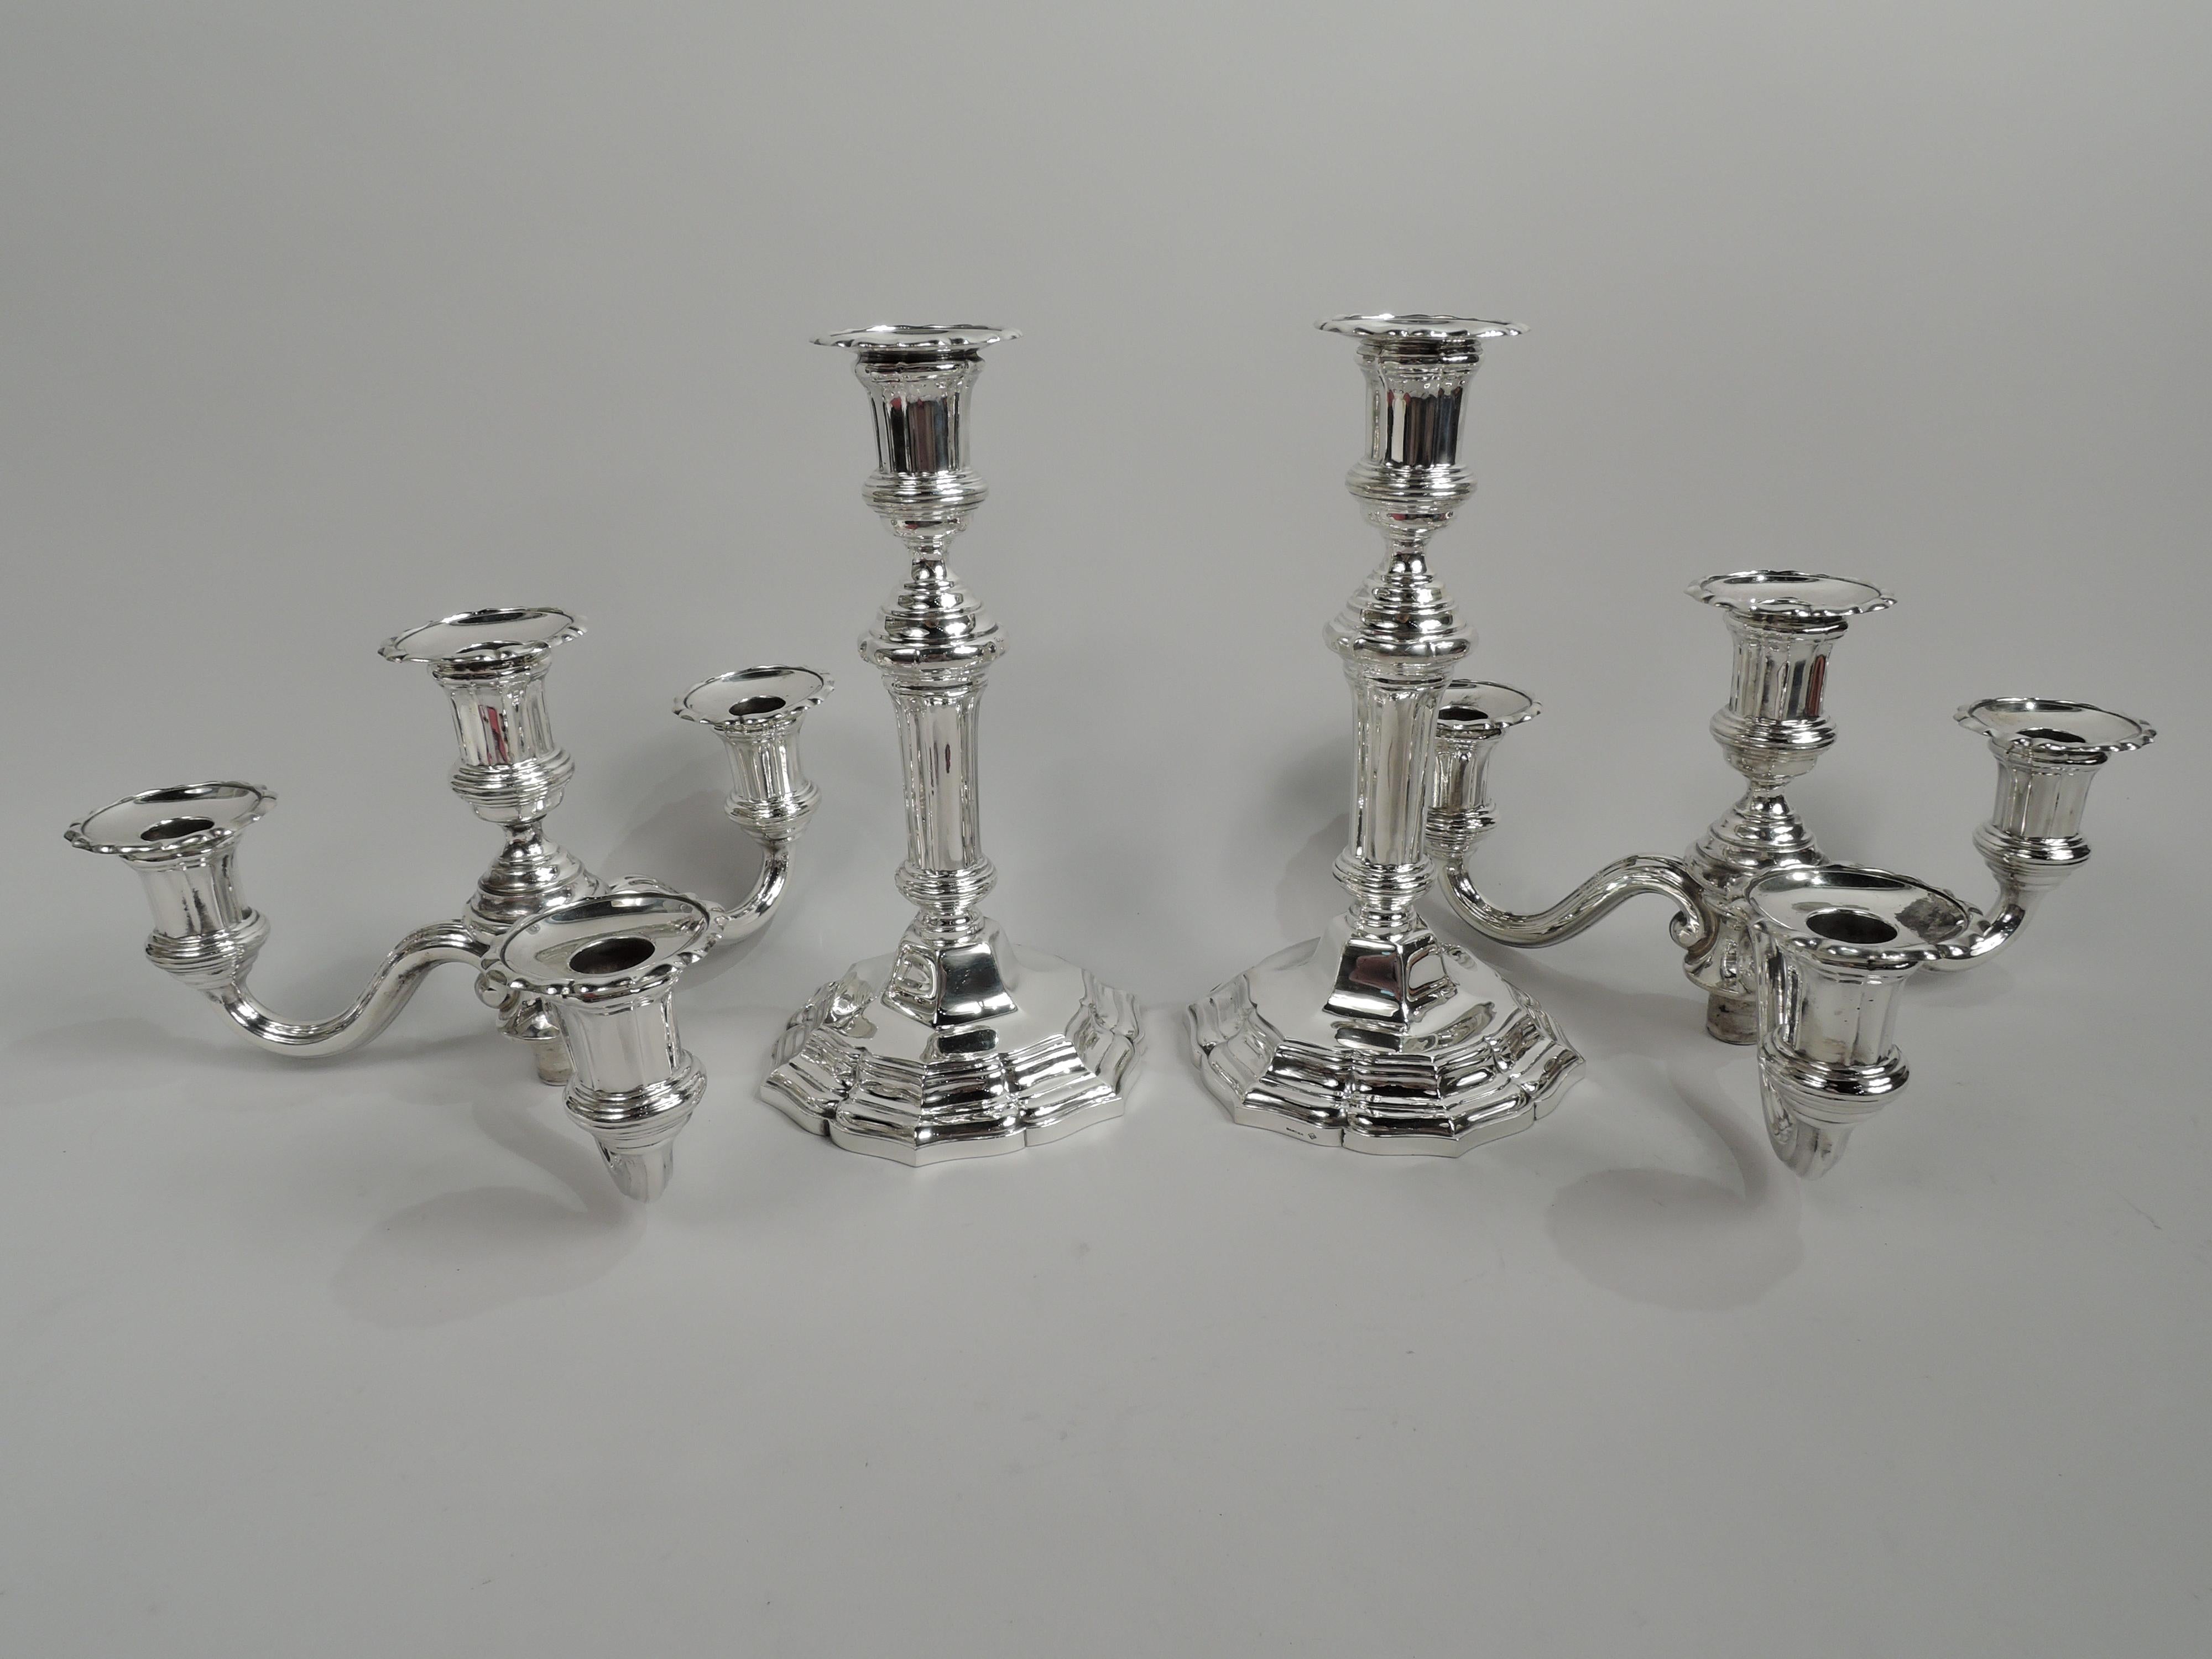 Pair of modern classical 950 silver 5-light candelabra. Made by Tetard Frères in France, ca 1920, for Cartier. Each: Fluted shaft with stepped and reeded knops; foot stepped with ogee-scroll rim. Three reeded s-scroll arms, each terminating in